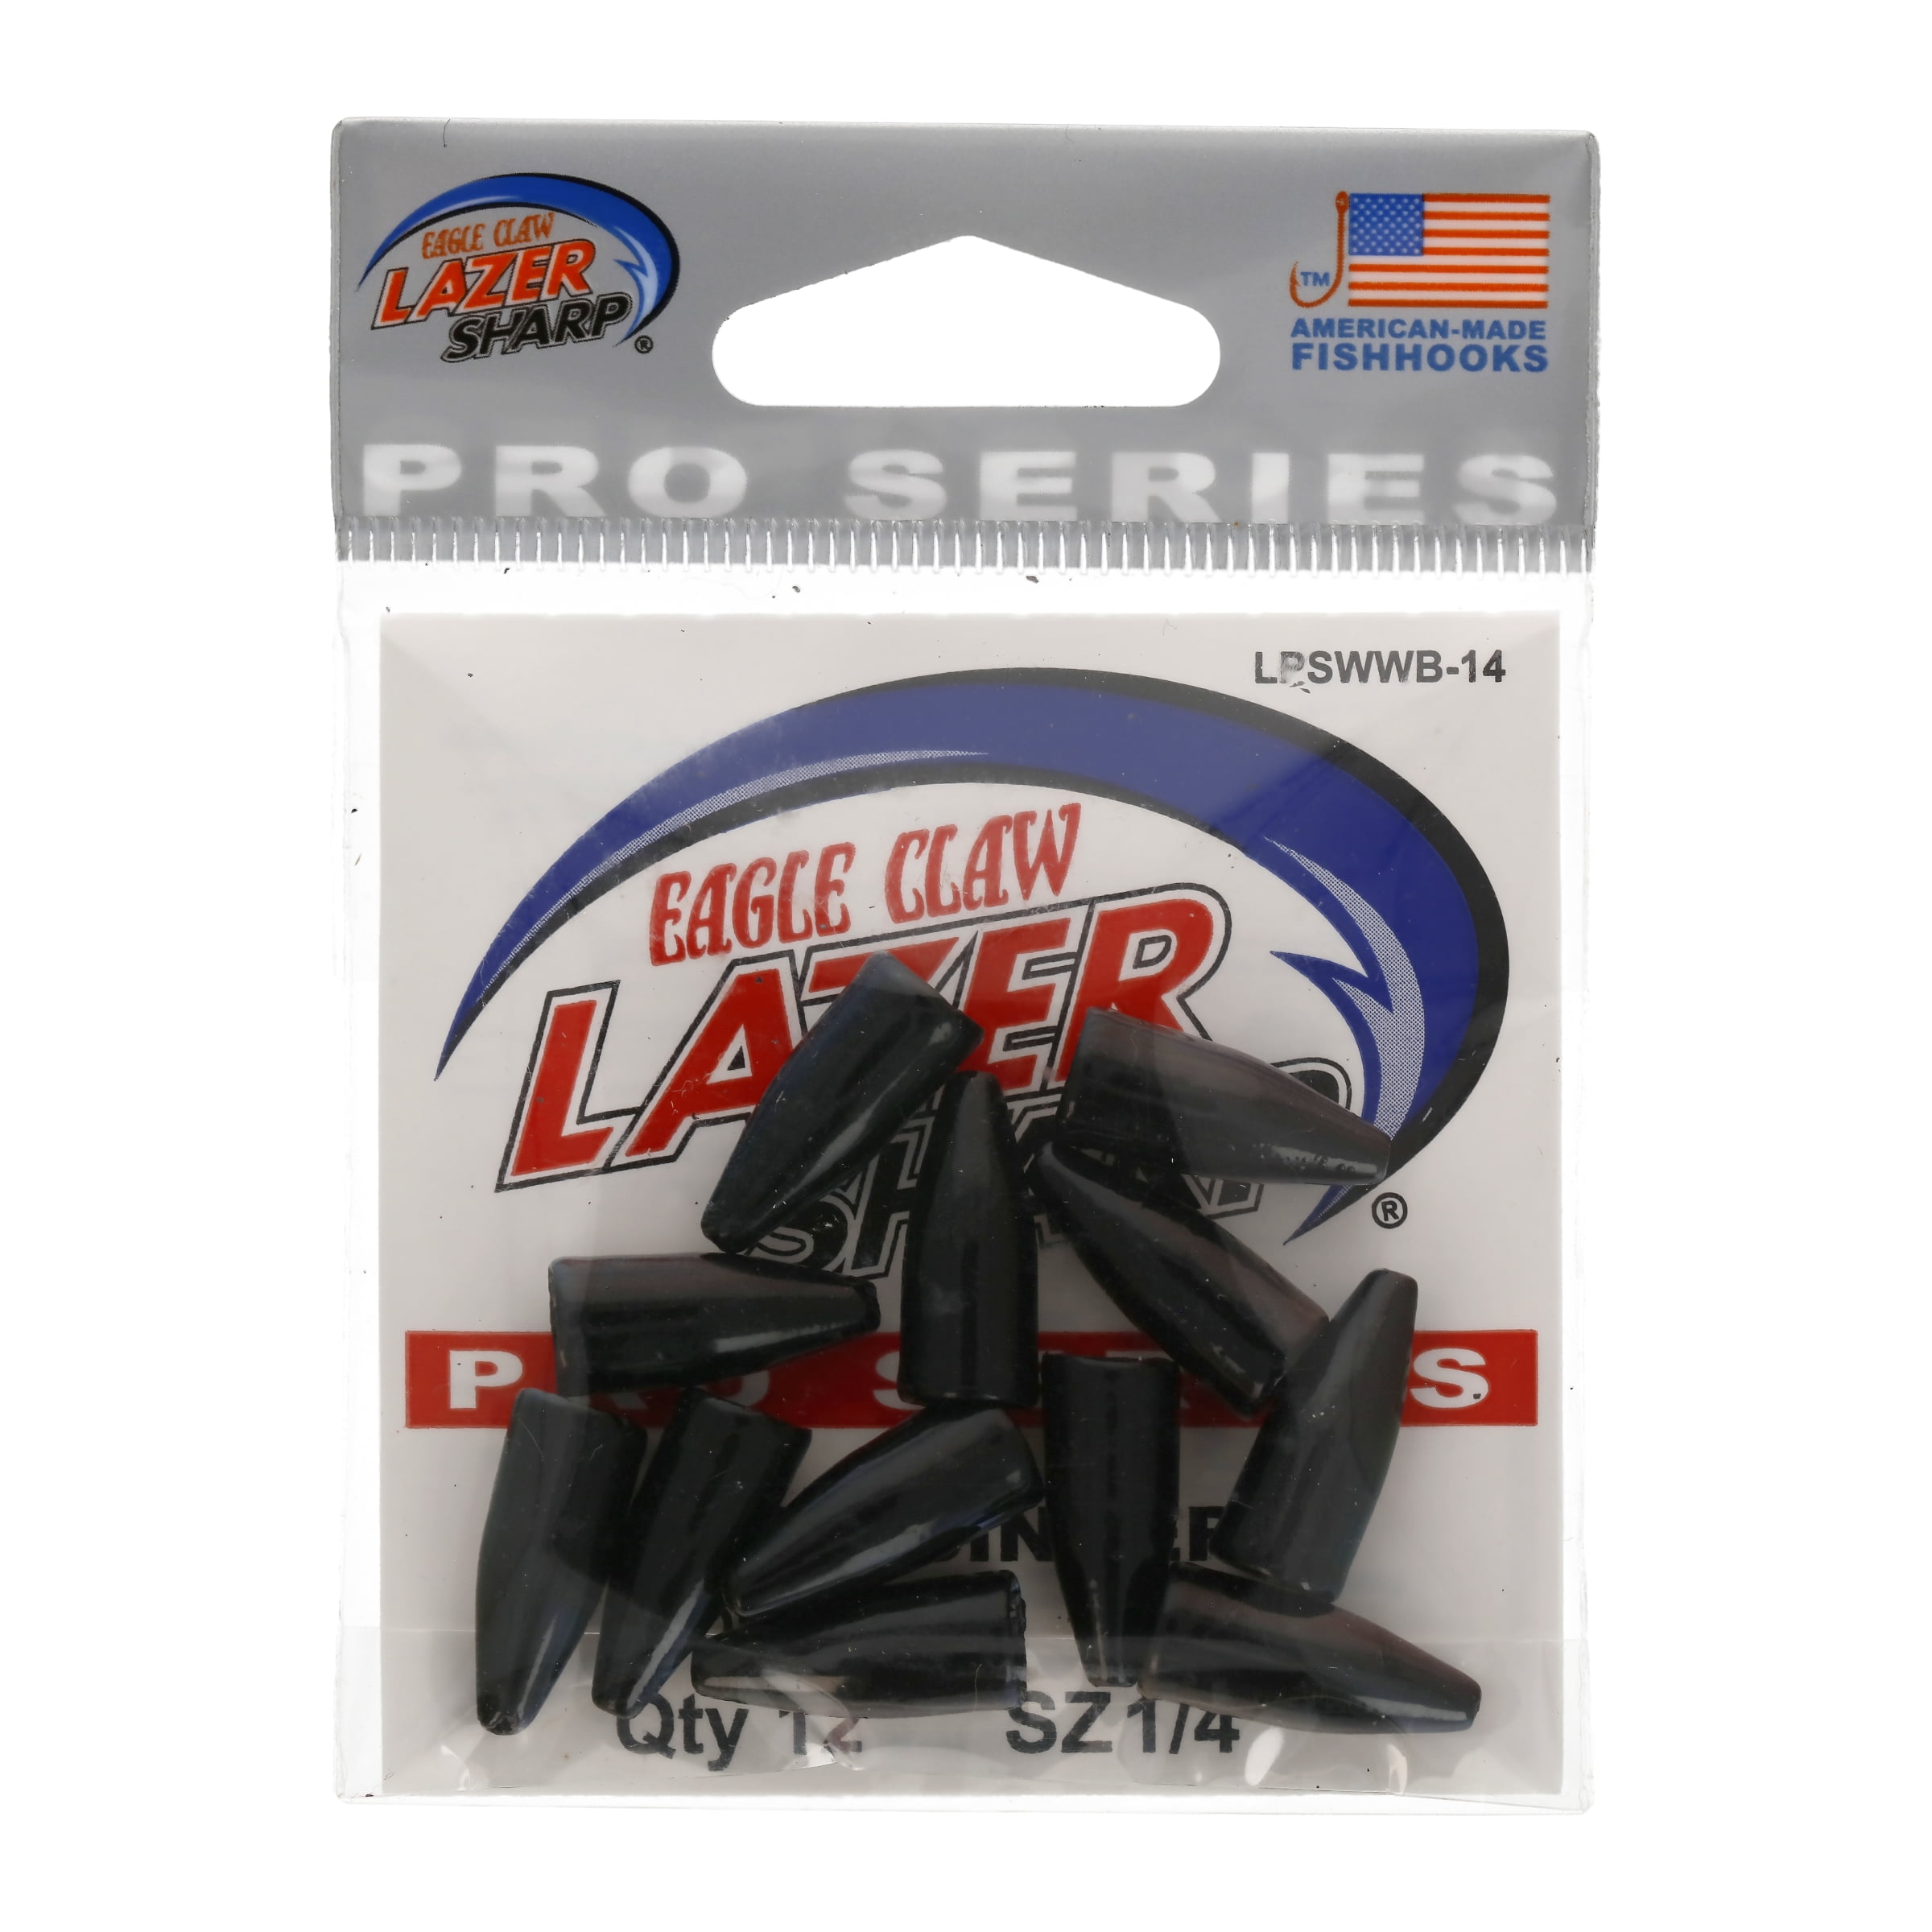 Eagle Claw Lazer Sharp Pro Series Worm Sinkers Value Pack, Black, 1/4 Oz.,  LPSWWB-14 